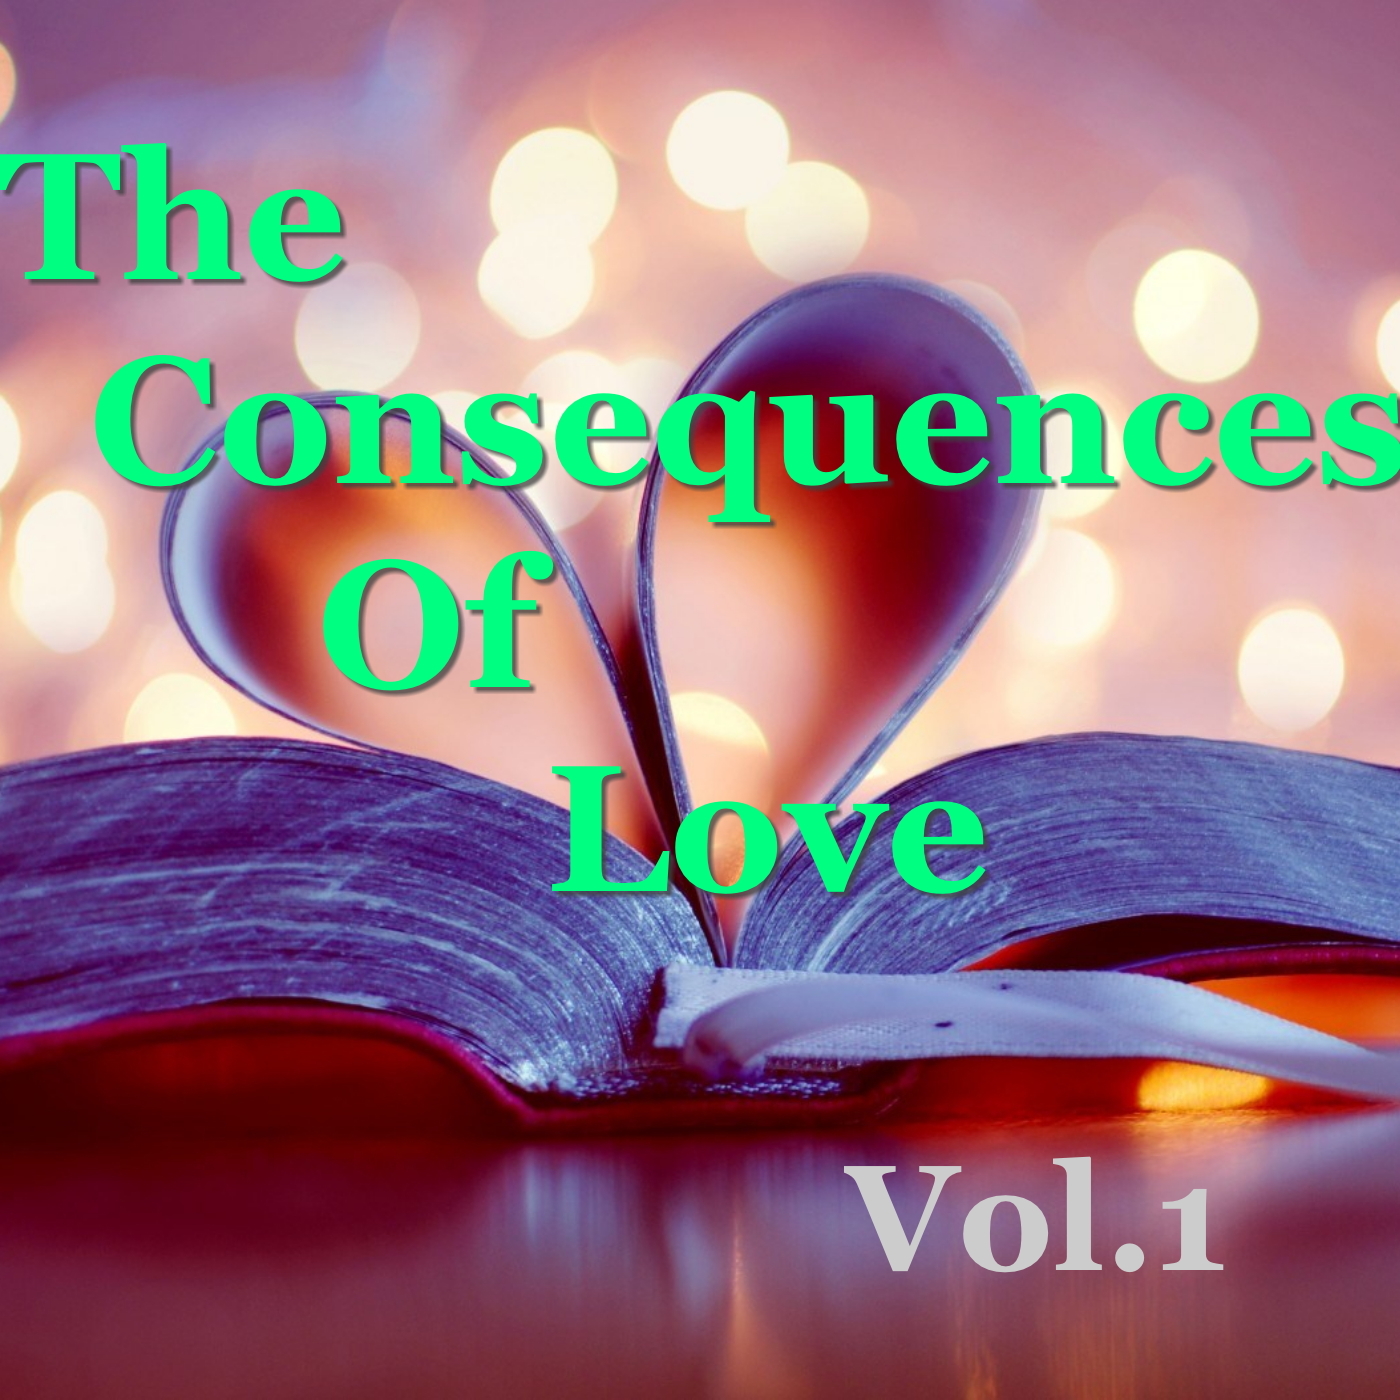 The Consequences Of Love, Vol. 1